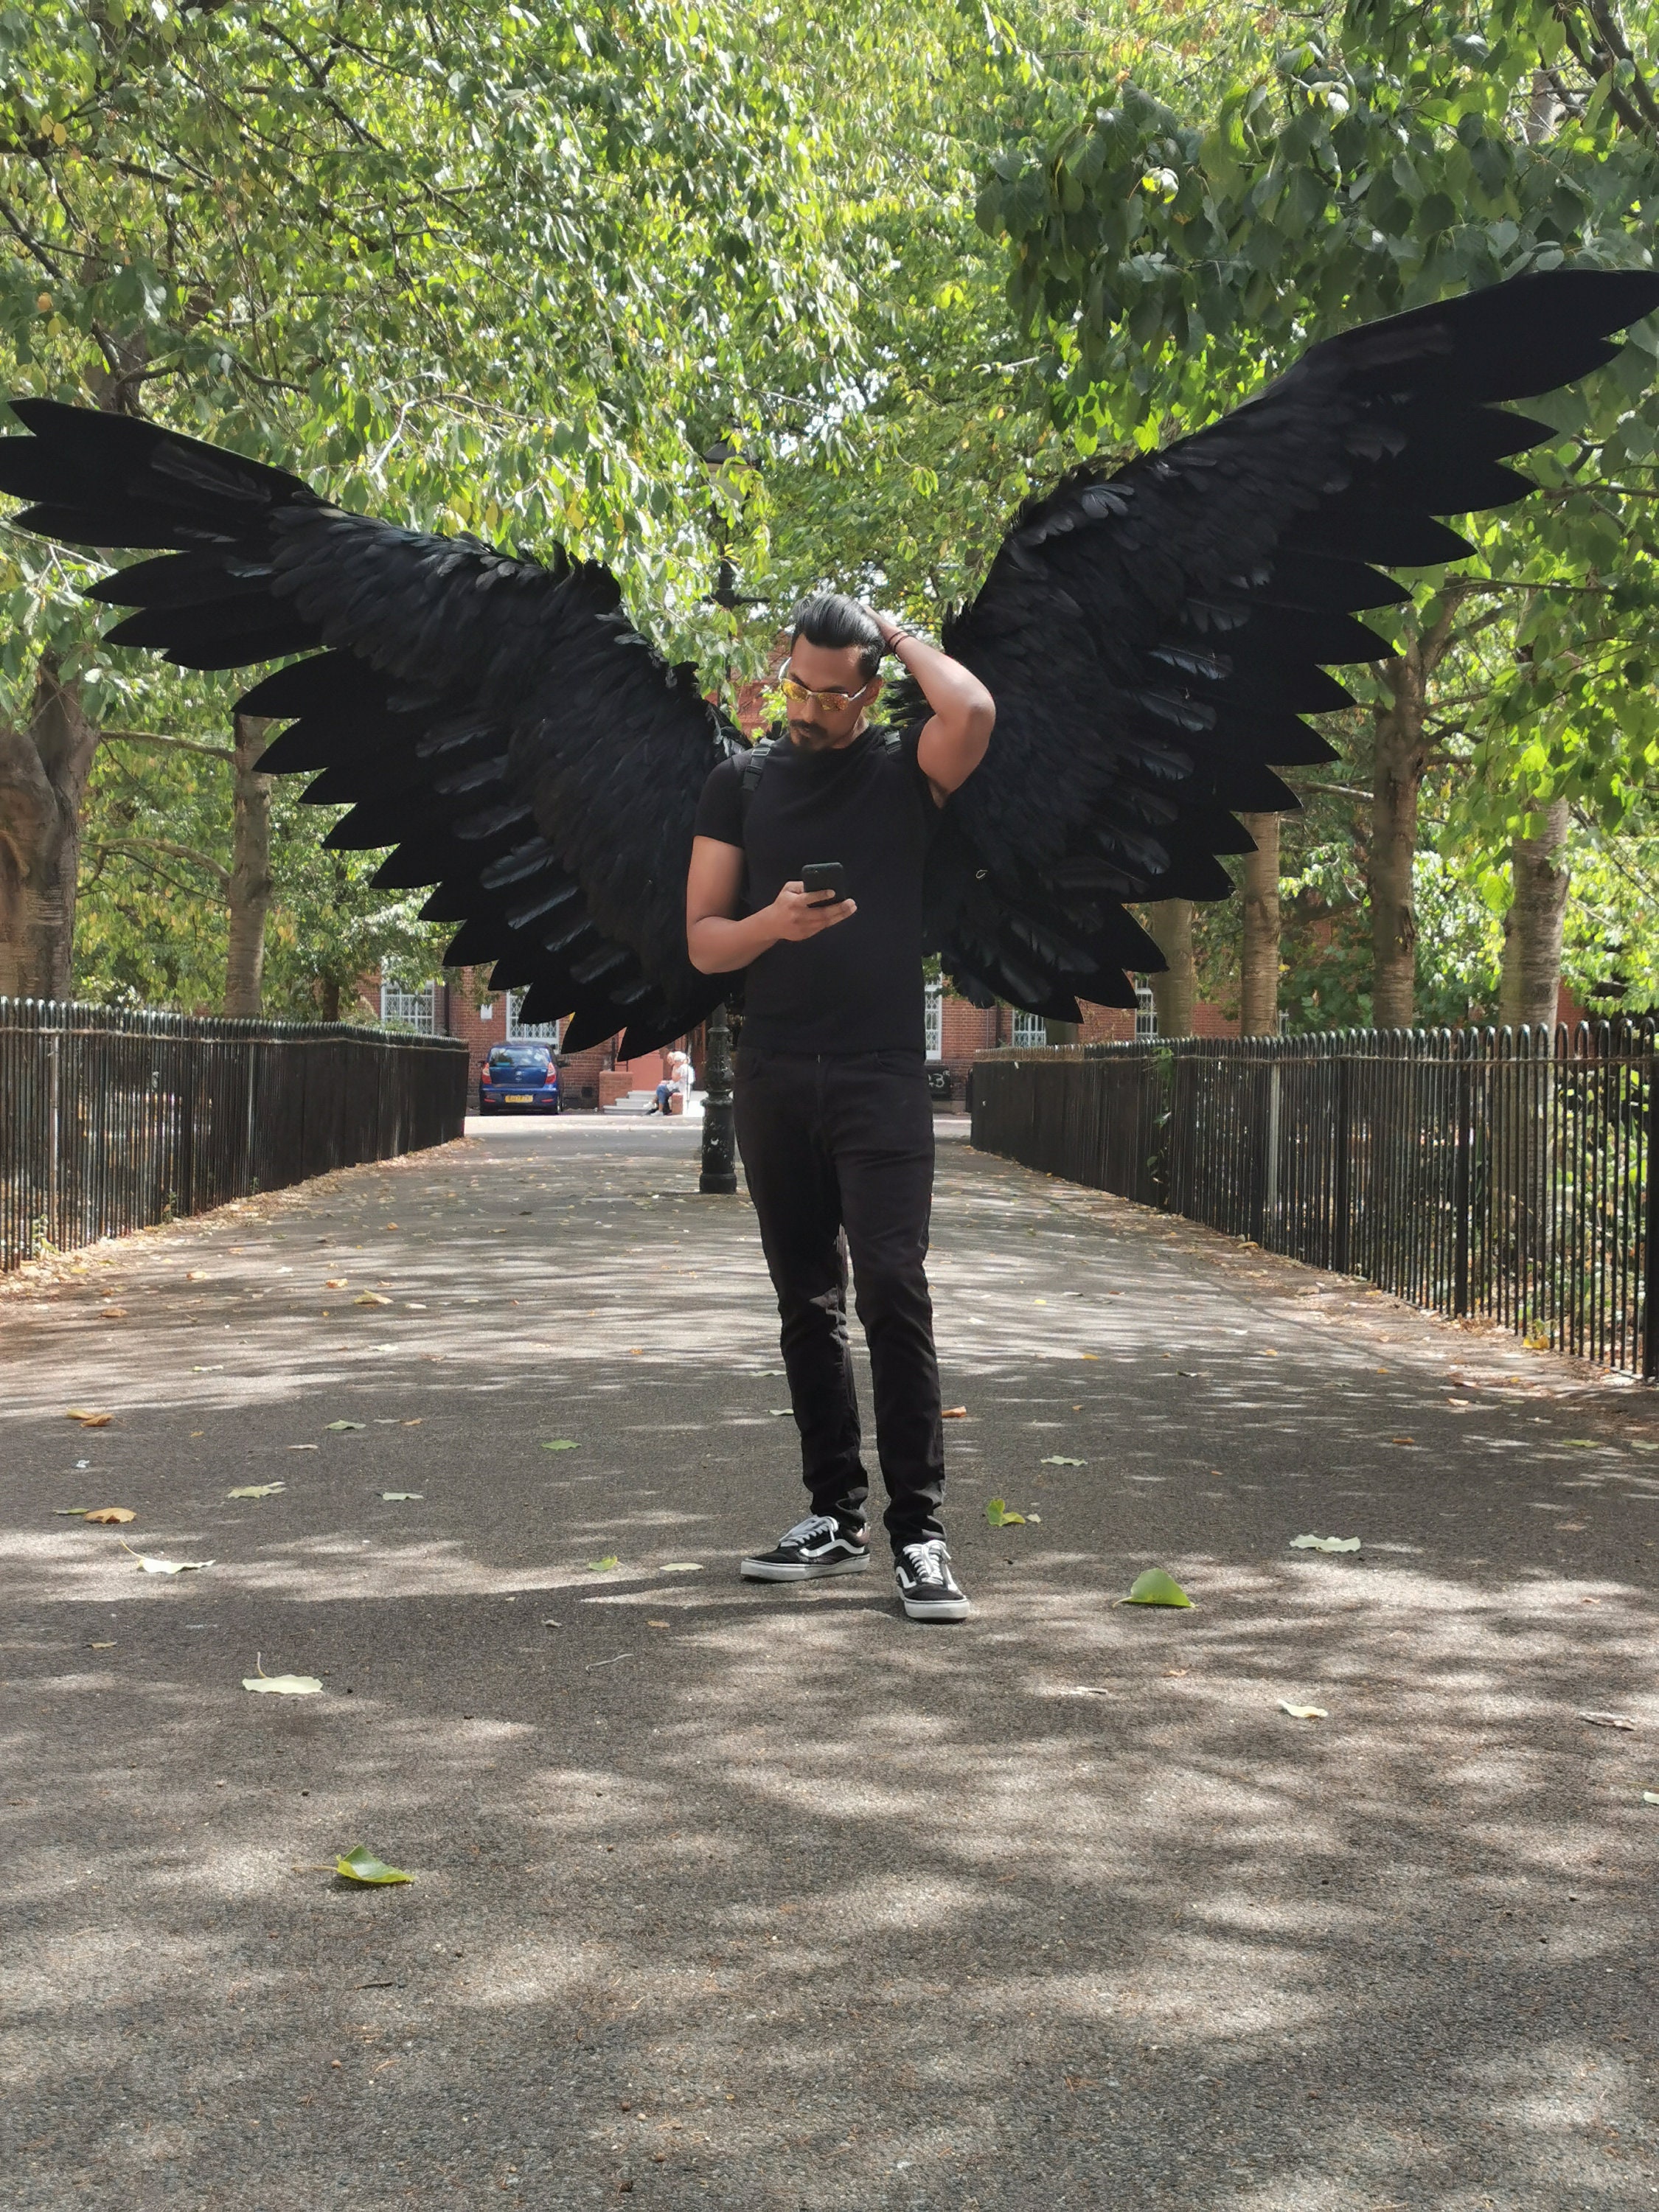 41inches, Black Cosplay Wings Carnival Pretend Play Dress Up Costume Accessory Lightweight Beautiful Wings Clearance Sale Halloween Costume Adult 